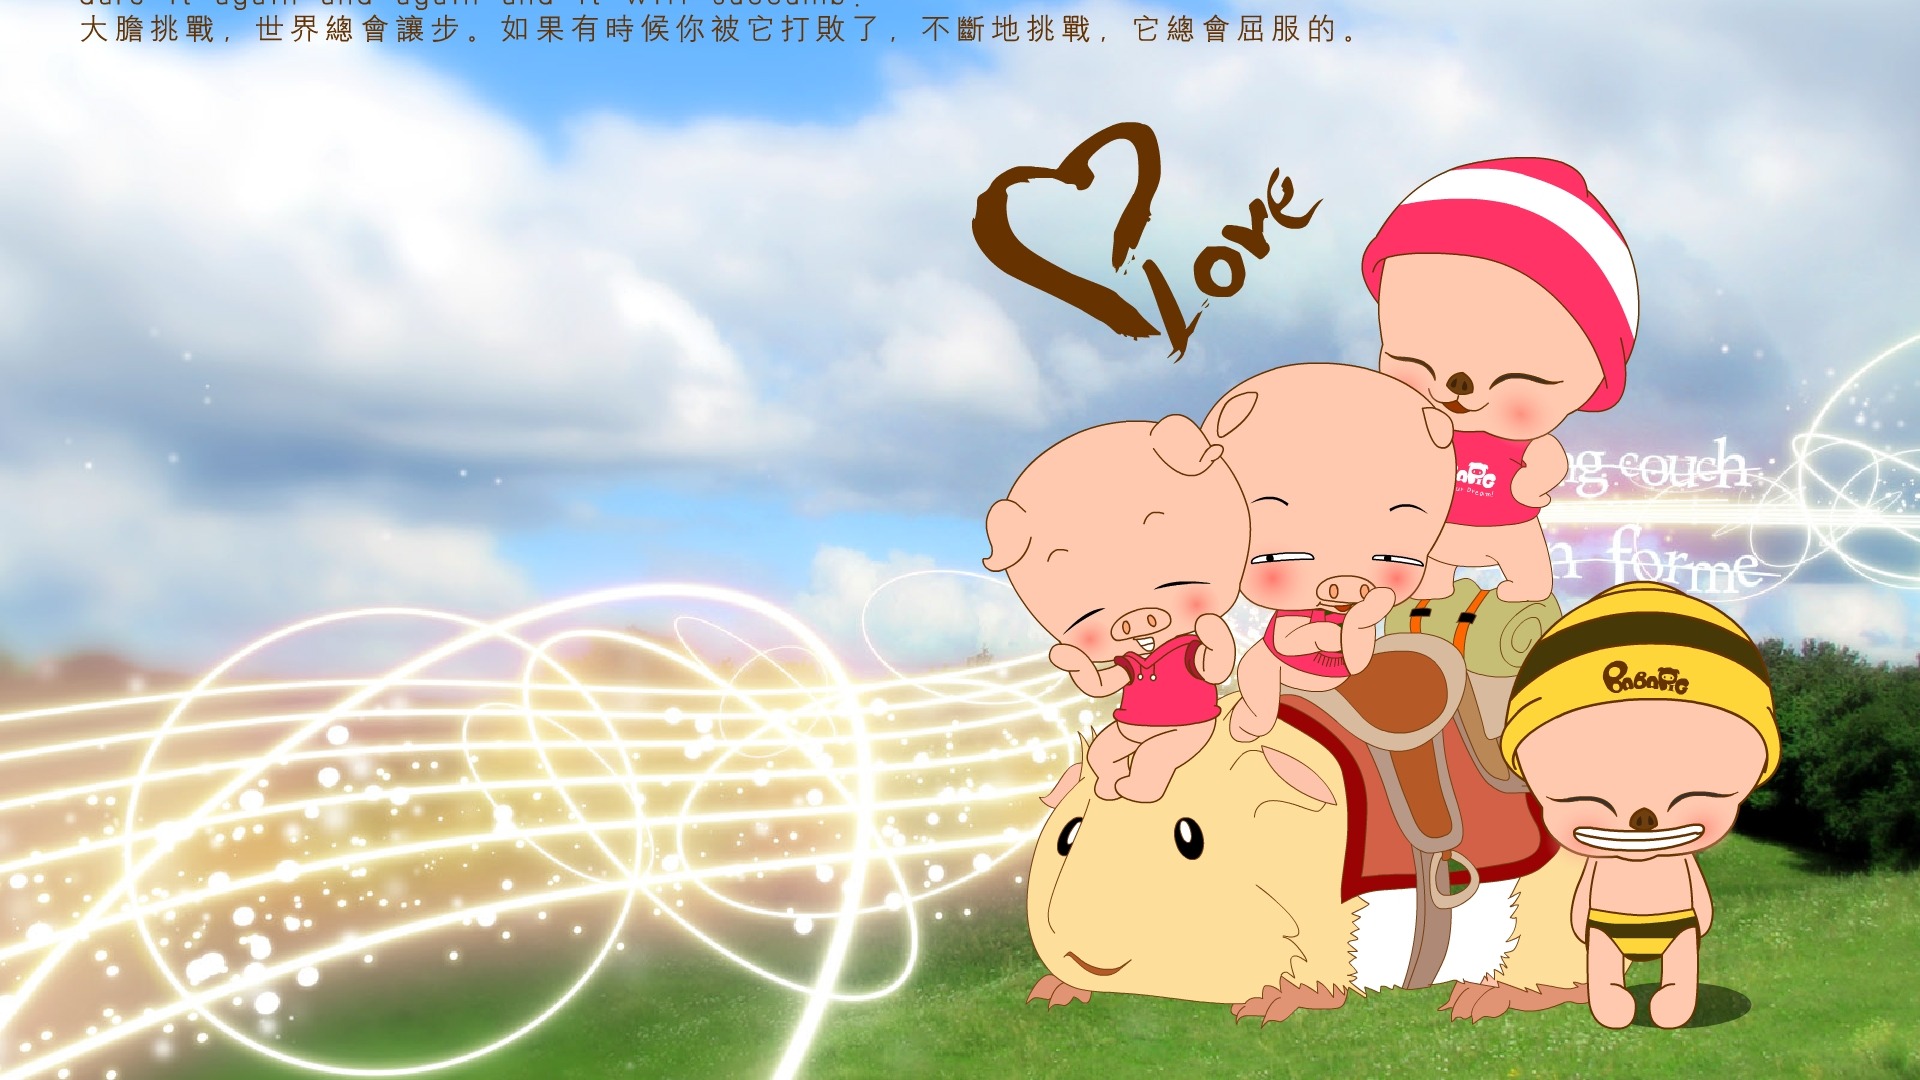 Love & Wallpaper Picasso Flying Pig #10 - 1920x1080